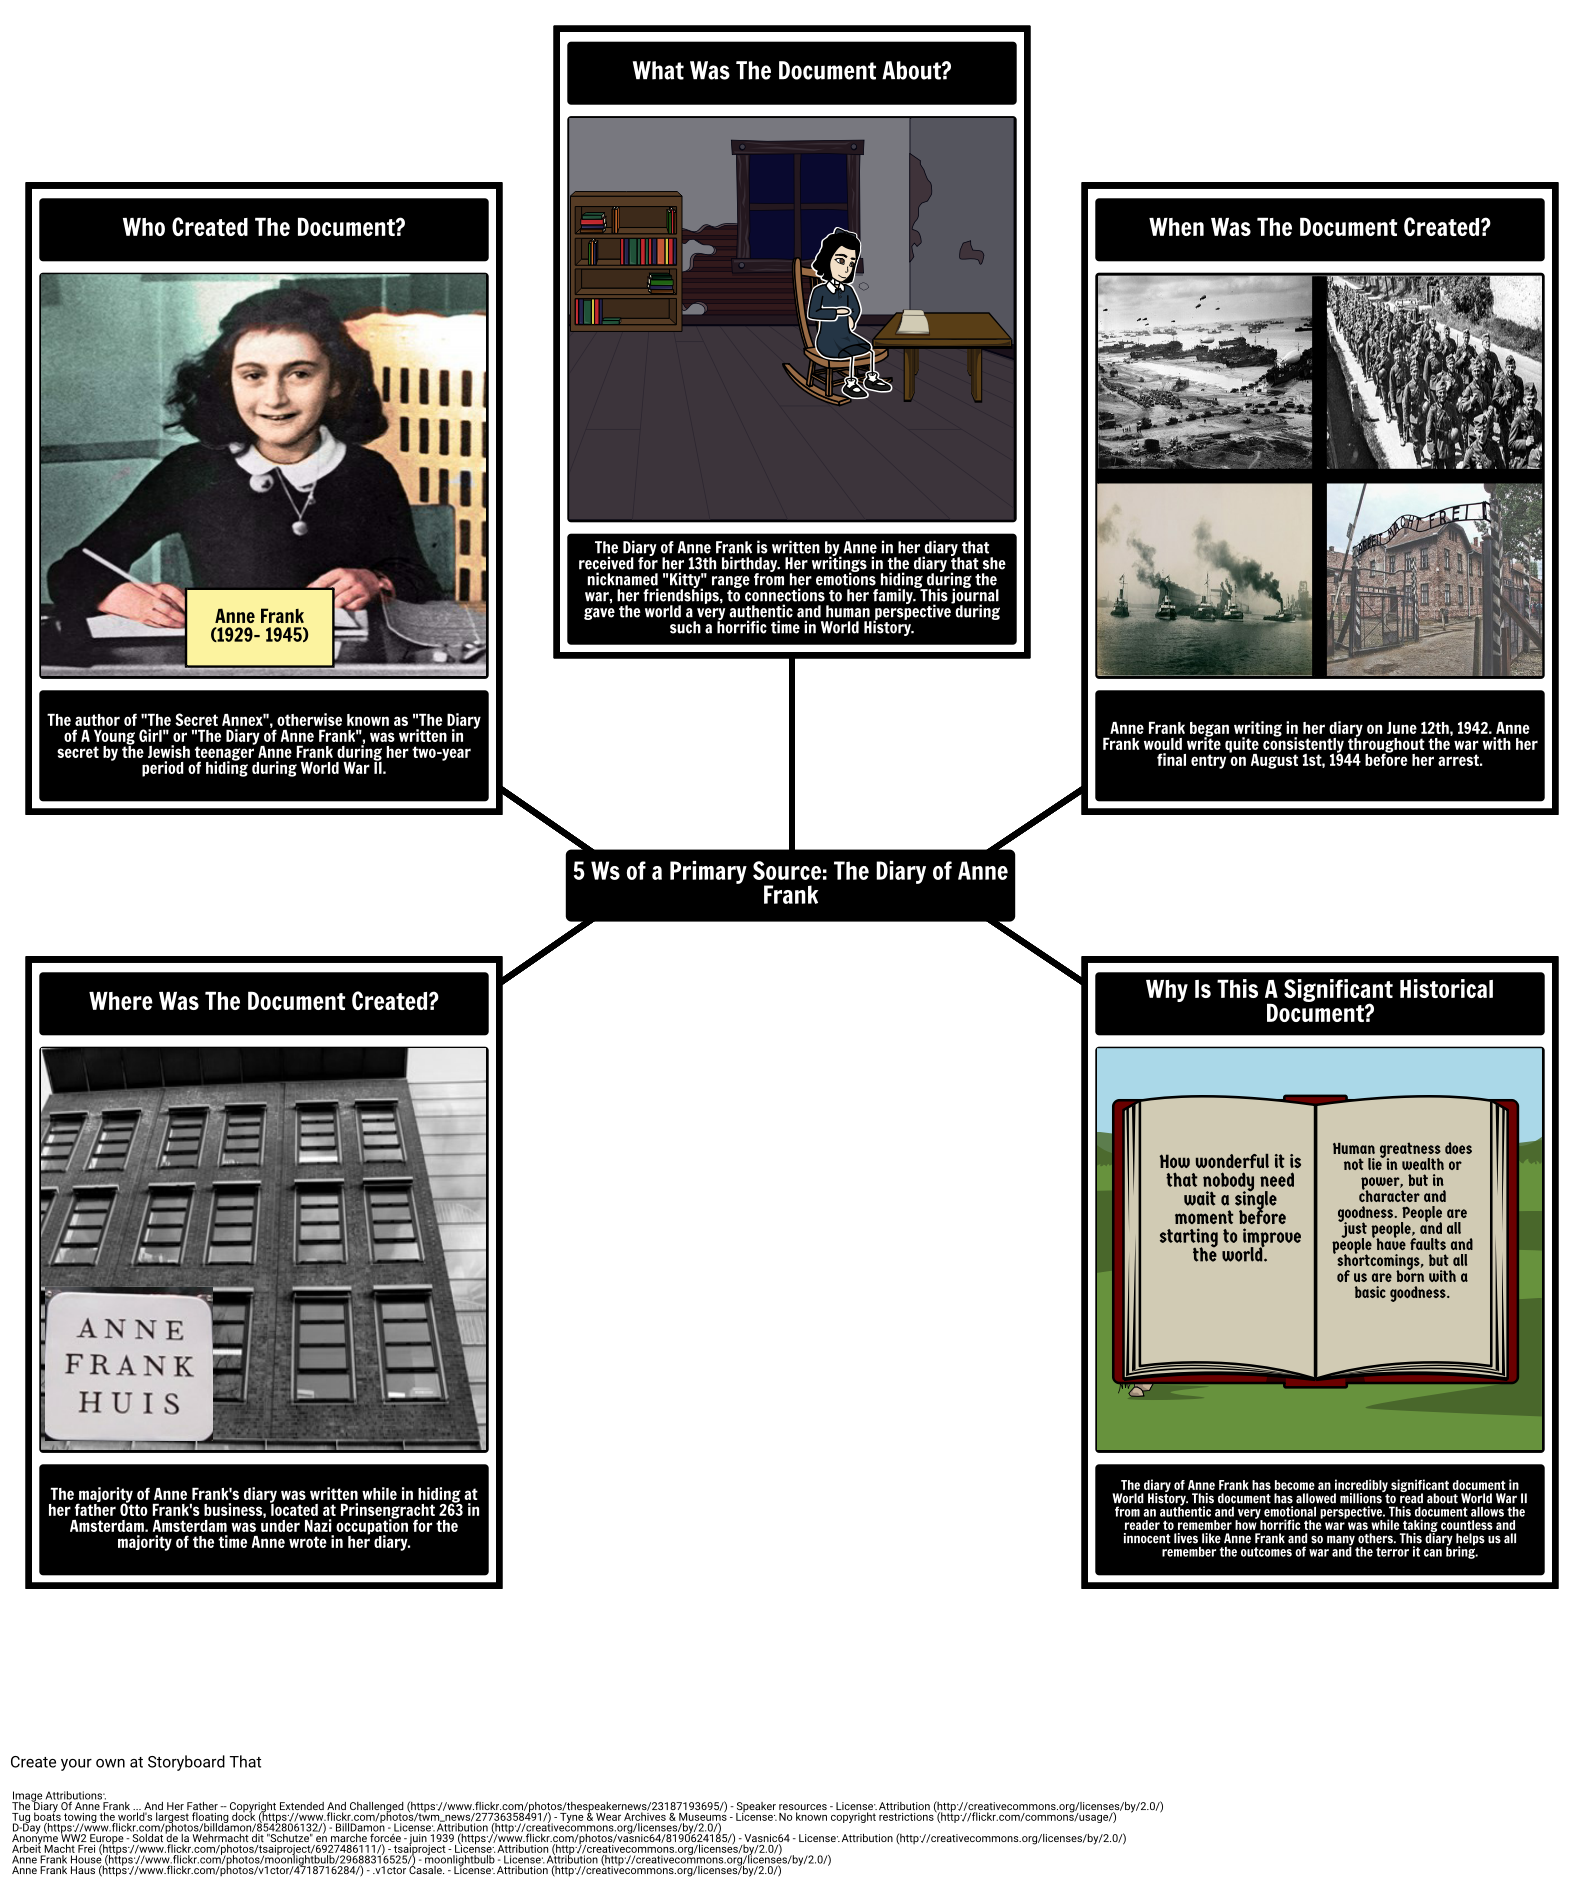 Primary Source 5Ws: The Diary of Anne Frank